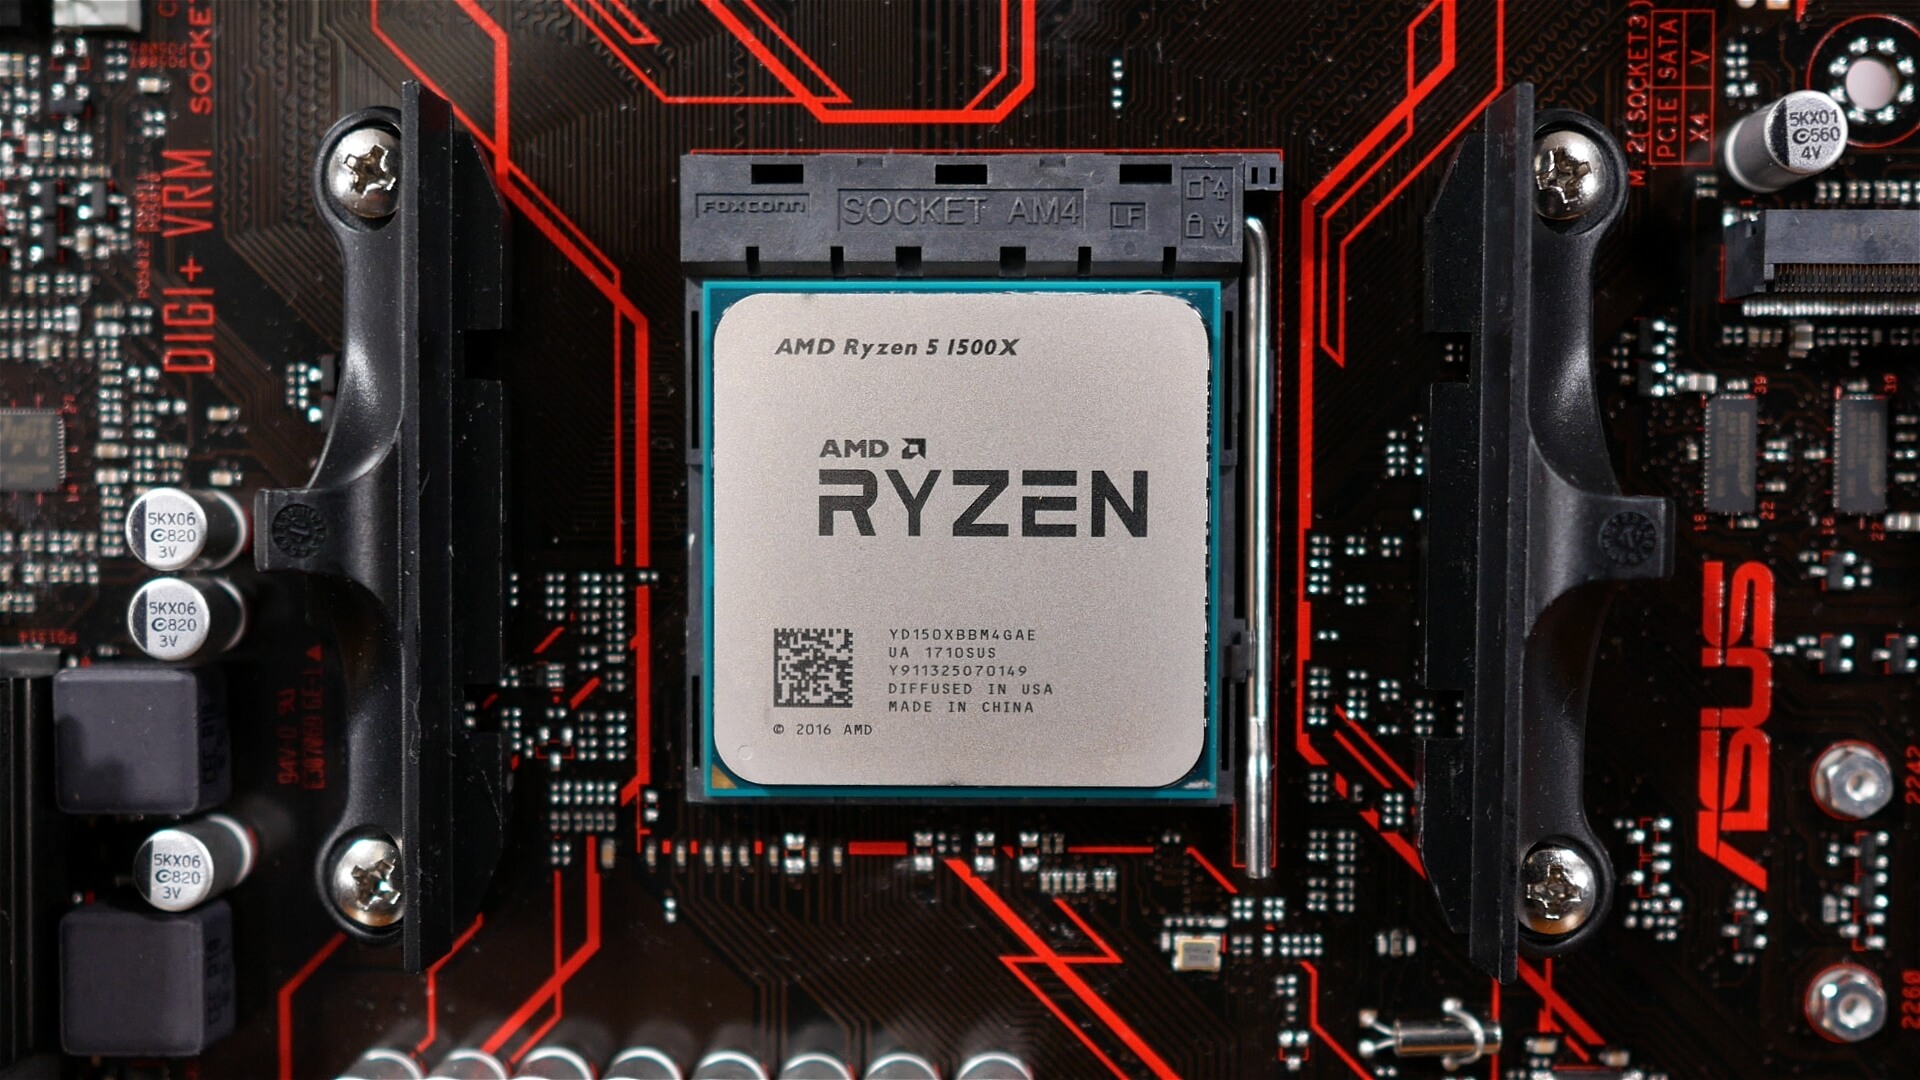 AMD Ryzen and Epyc platforms at risk: More than a dozen critical security flaws discovered